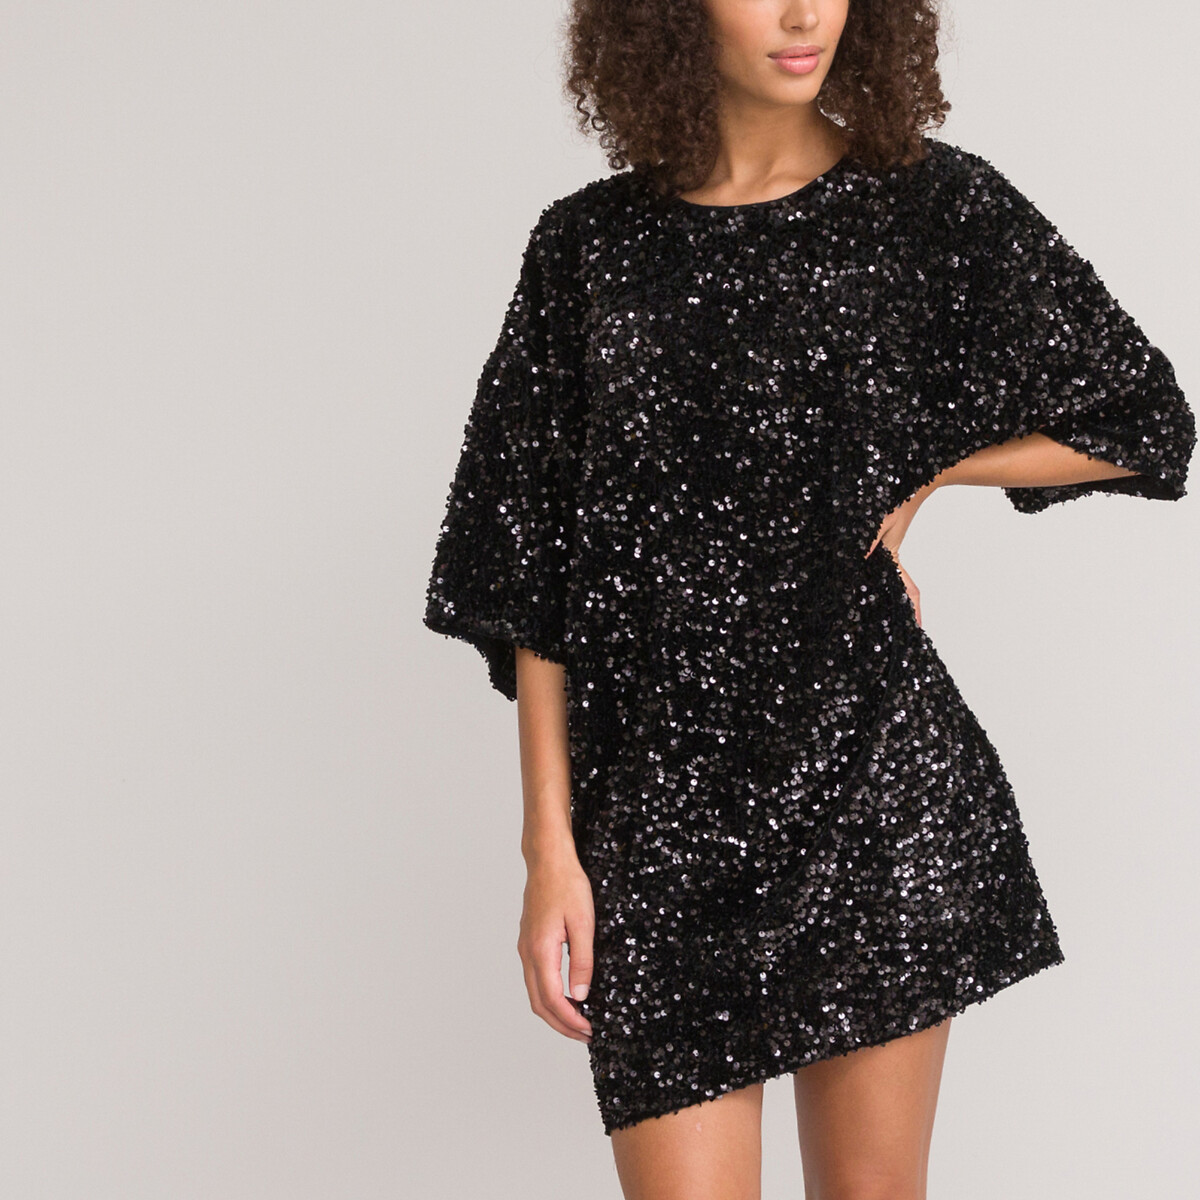 Sequin Mini Dress with 3/4 Length Sleeves and Crew Neck